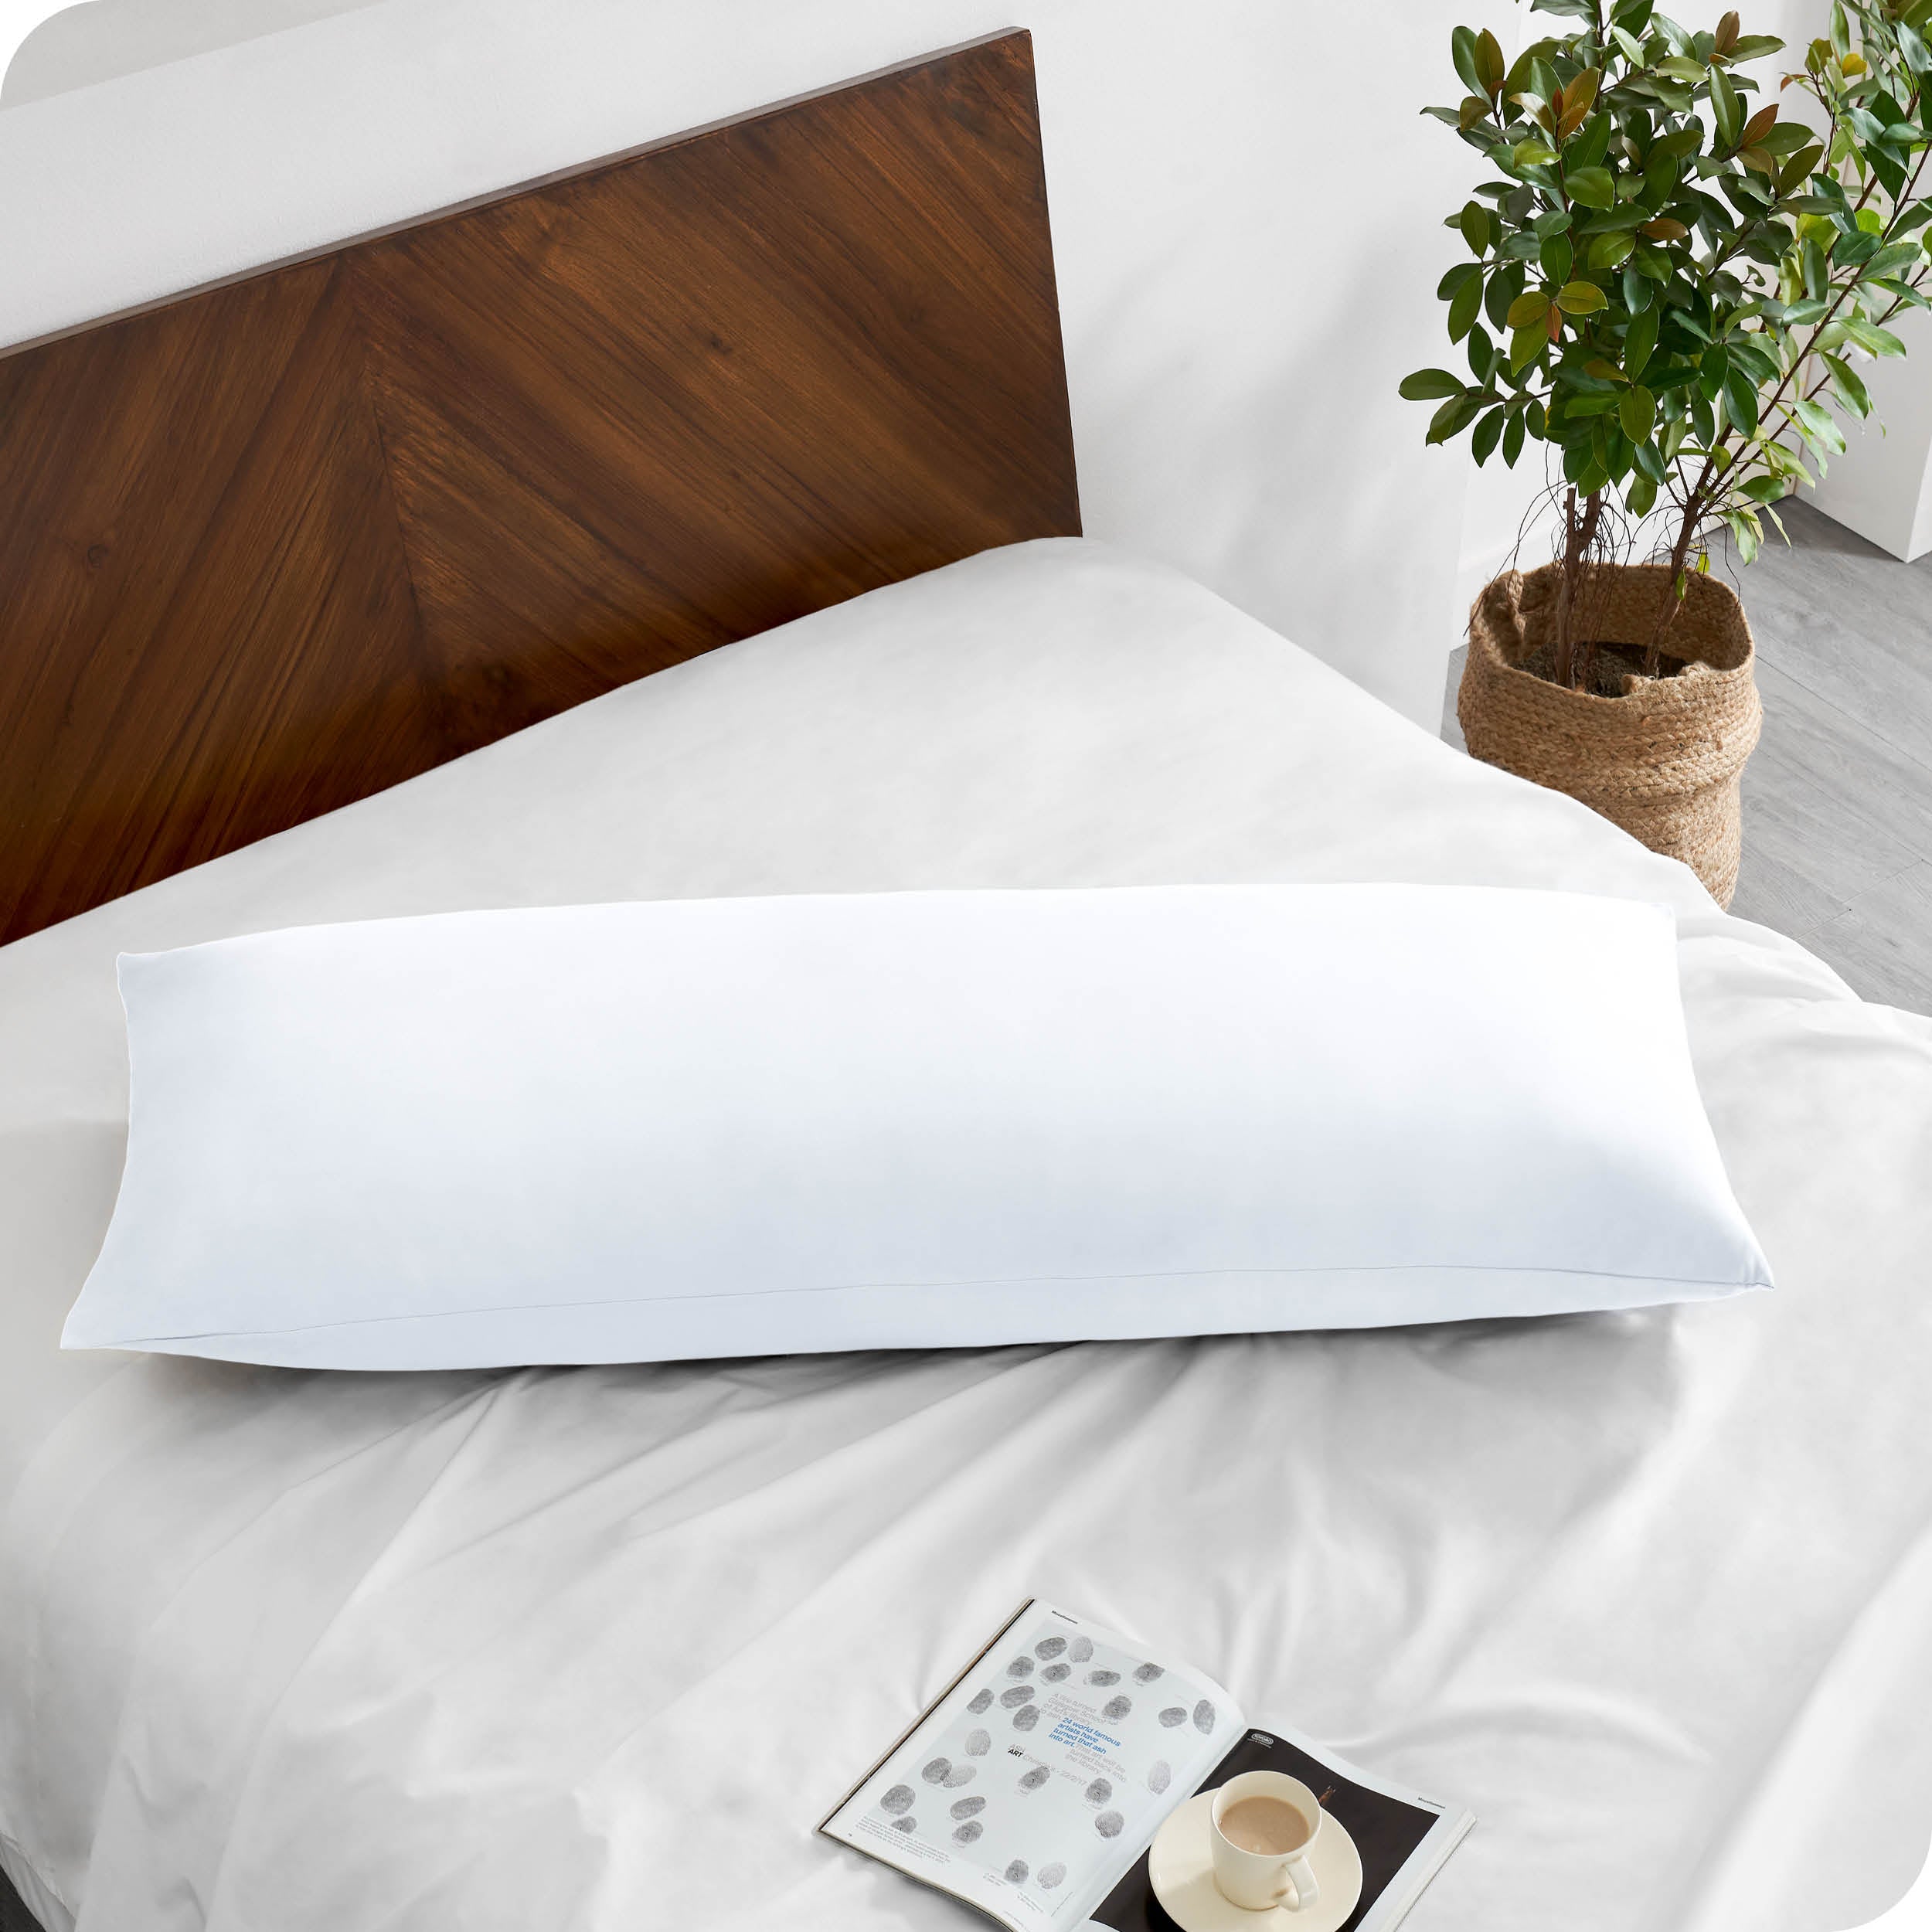 A body pillow cover on a pillow on a bed made with all white bedding